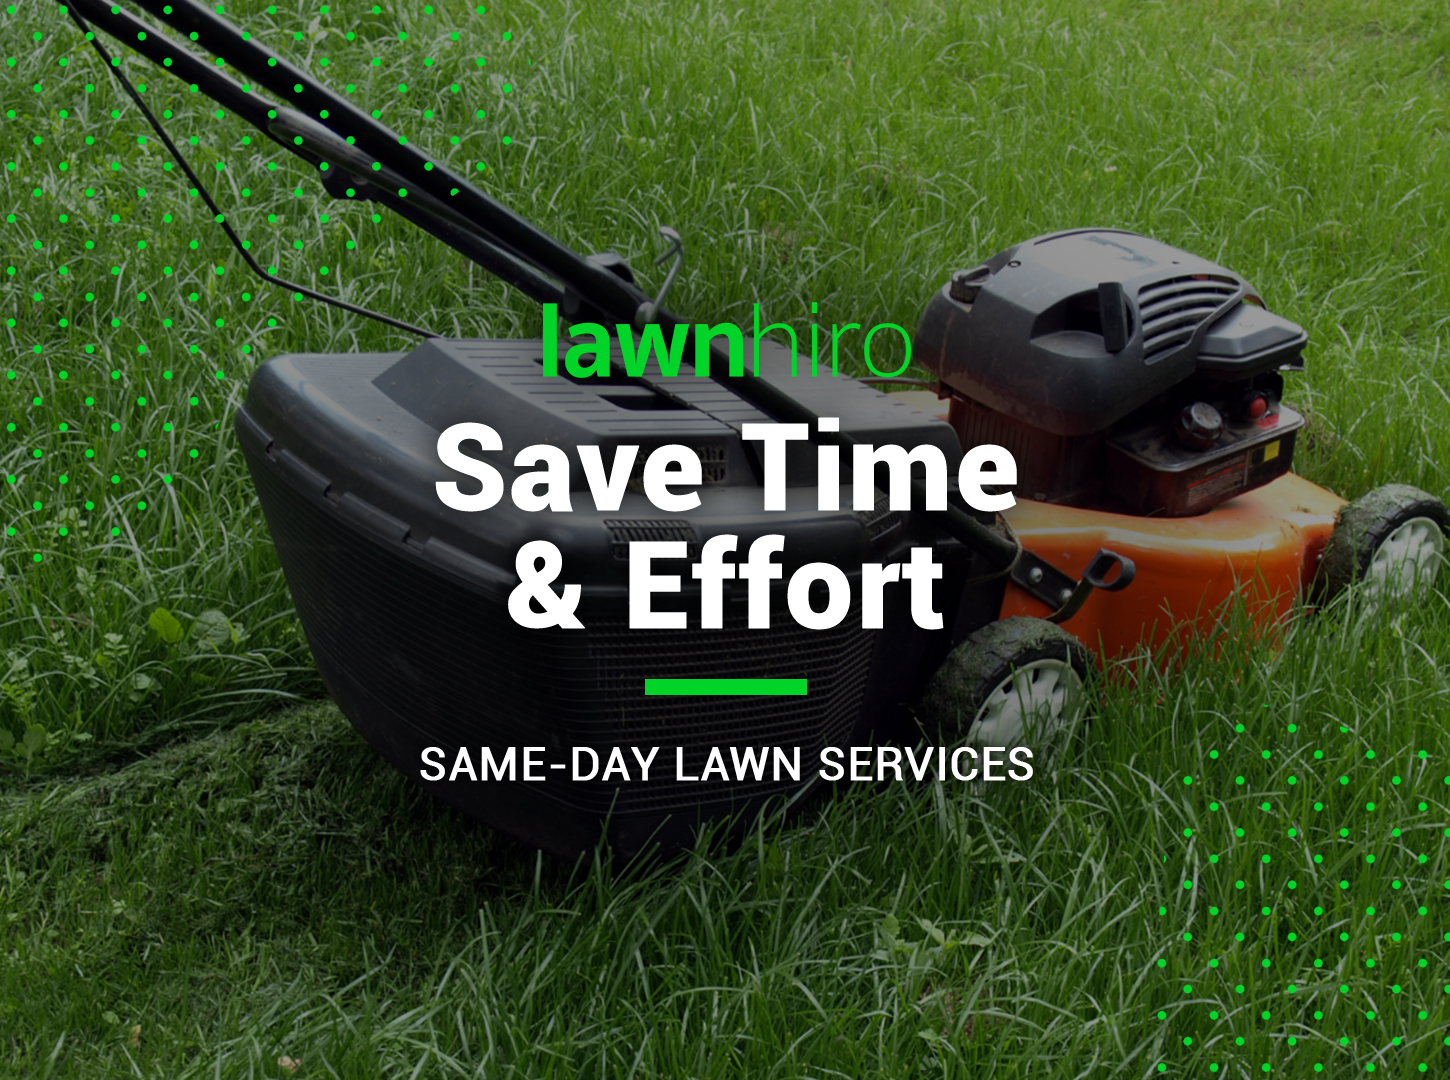 Save Time and Effort with Same-Day Lawn Services - Lawnhiro